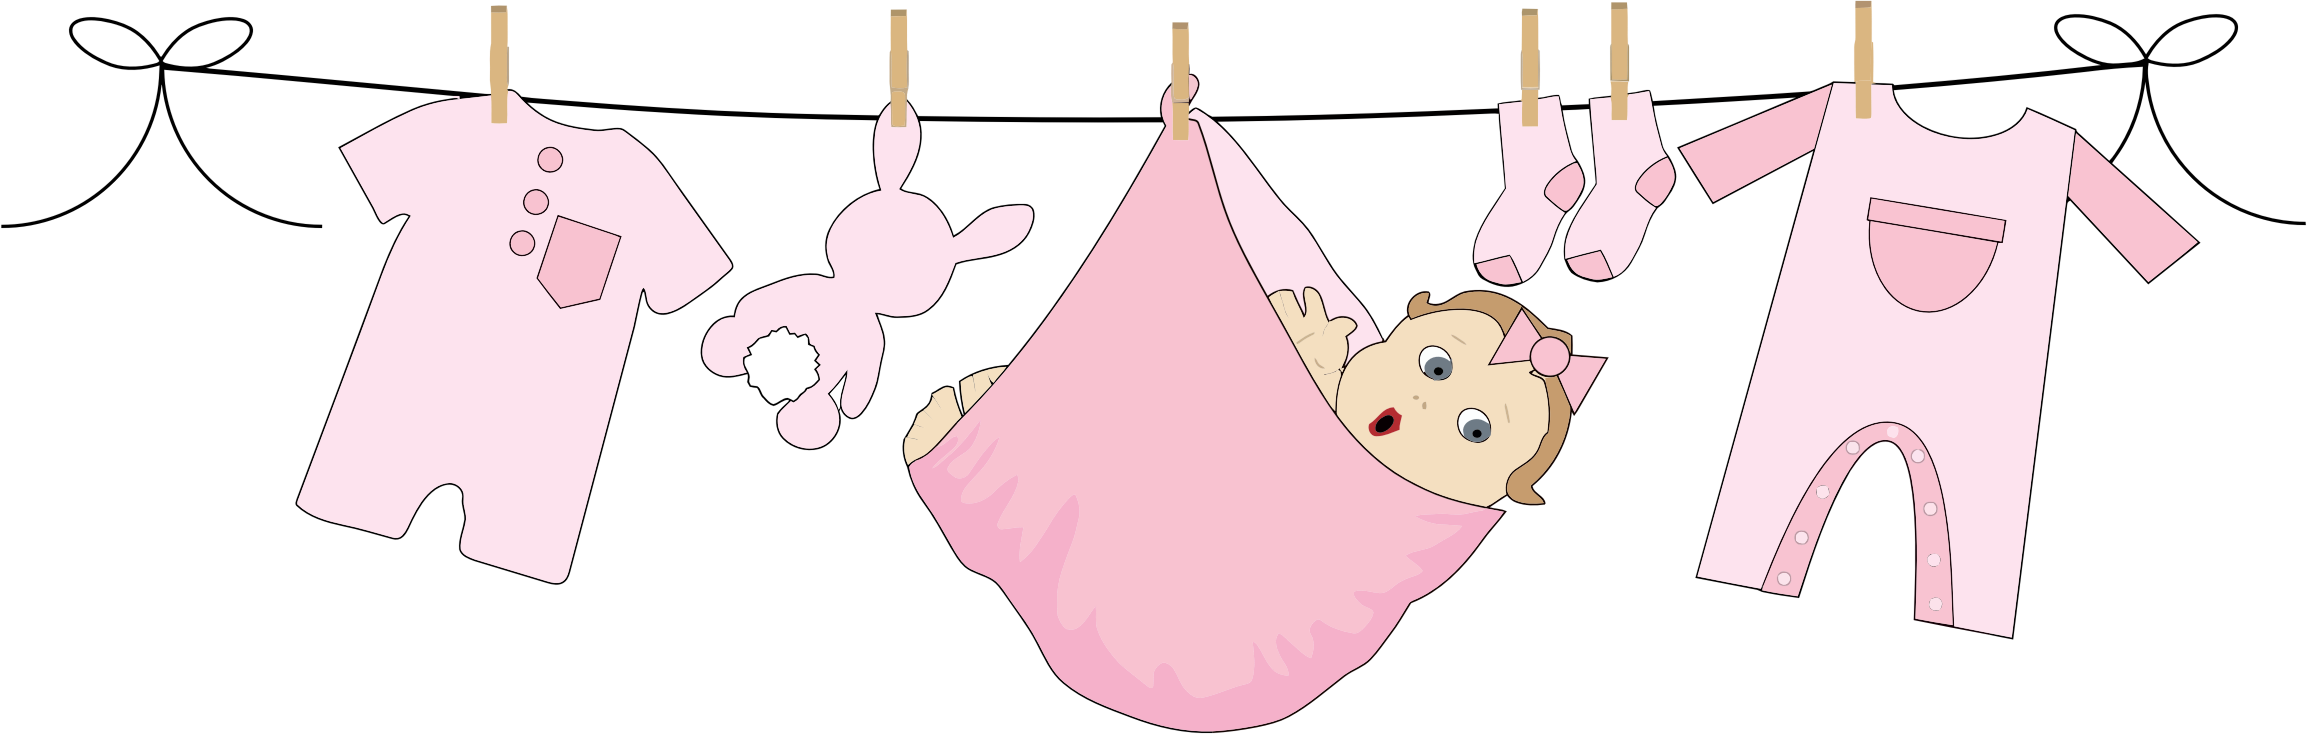 Clipart   Baby Girl Hanging On Clothesline